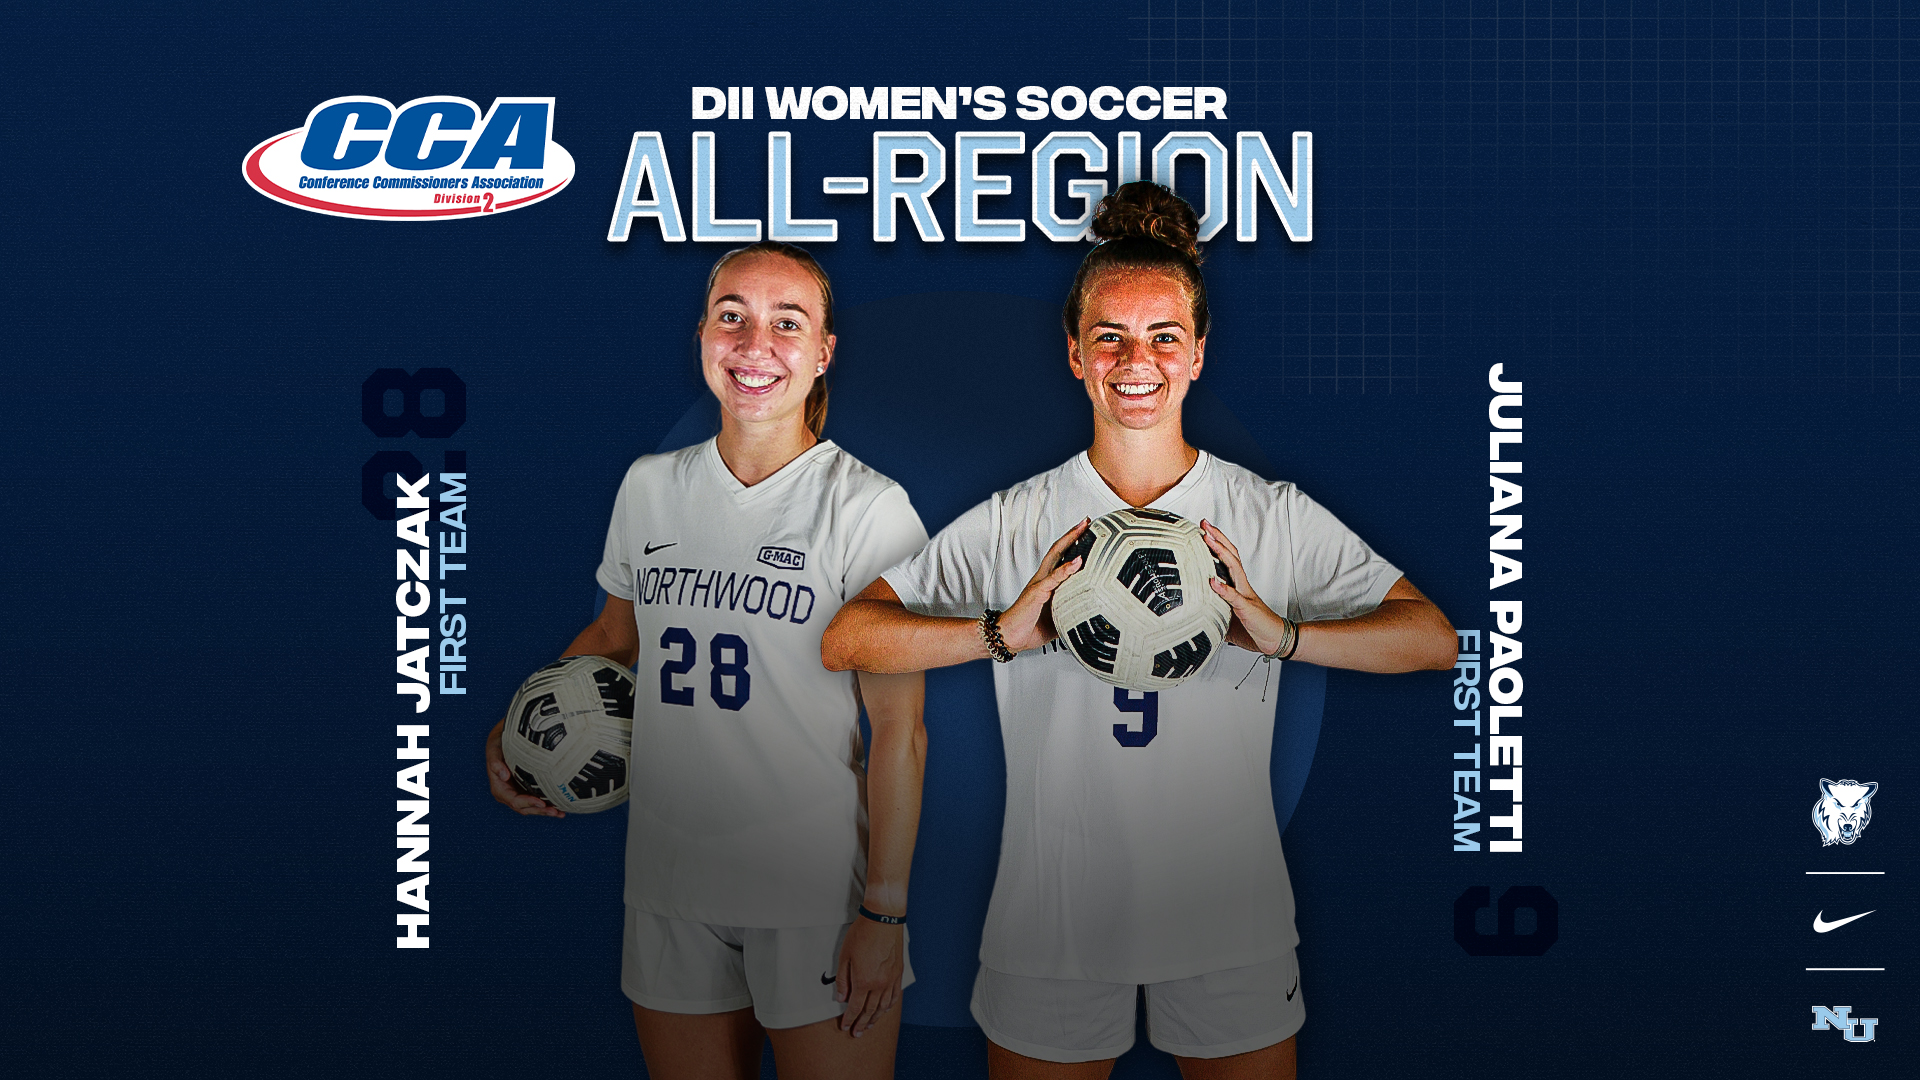 Jatczak And Paoletti Highlight Women's Soccer In DII CCA All-Region Honorees